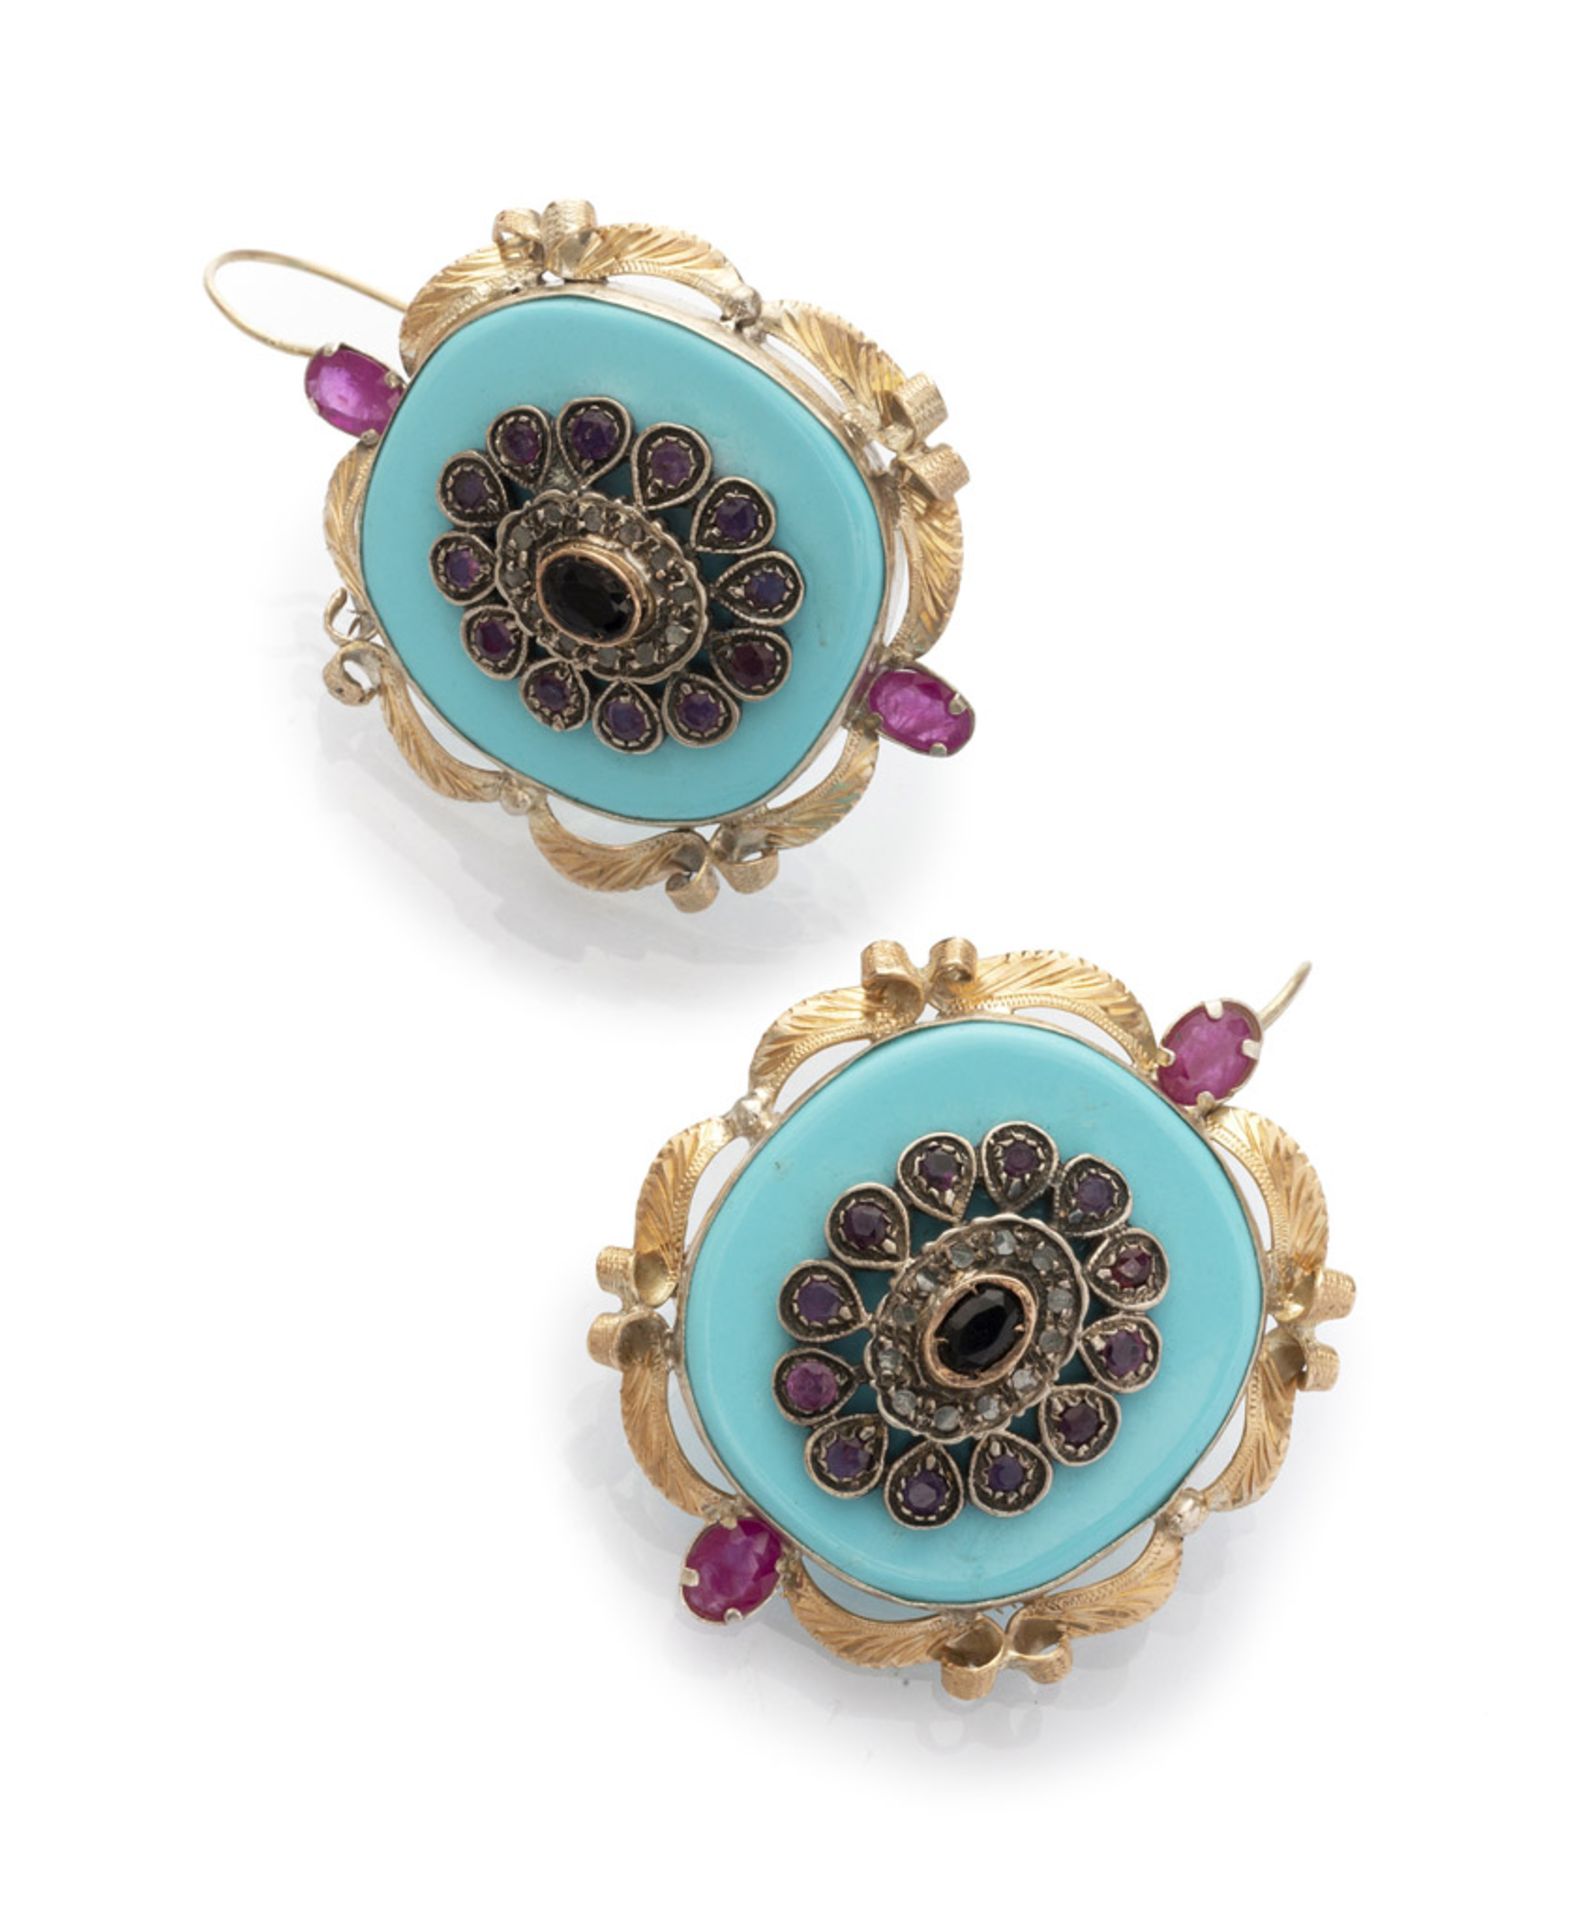 BEAUTIFUL PAIR OF EARRINGS in yellow gold and silver, with turquoise framed by a ribbon in gold